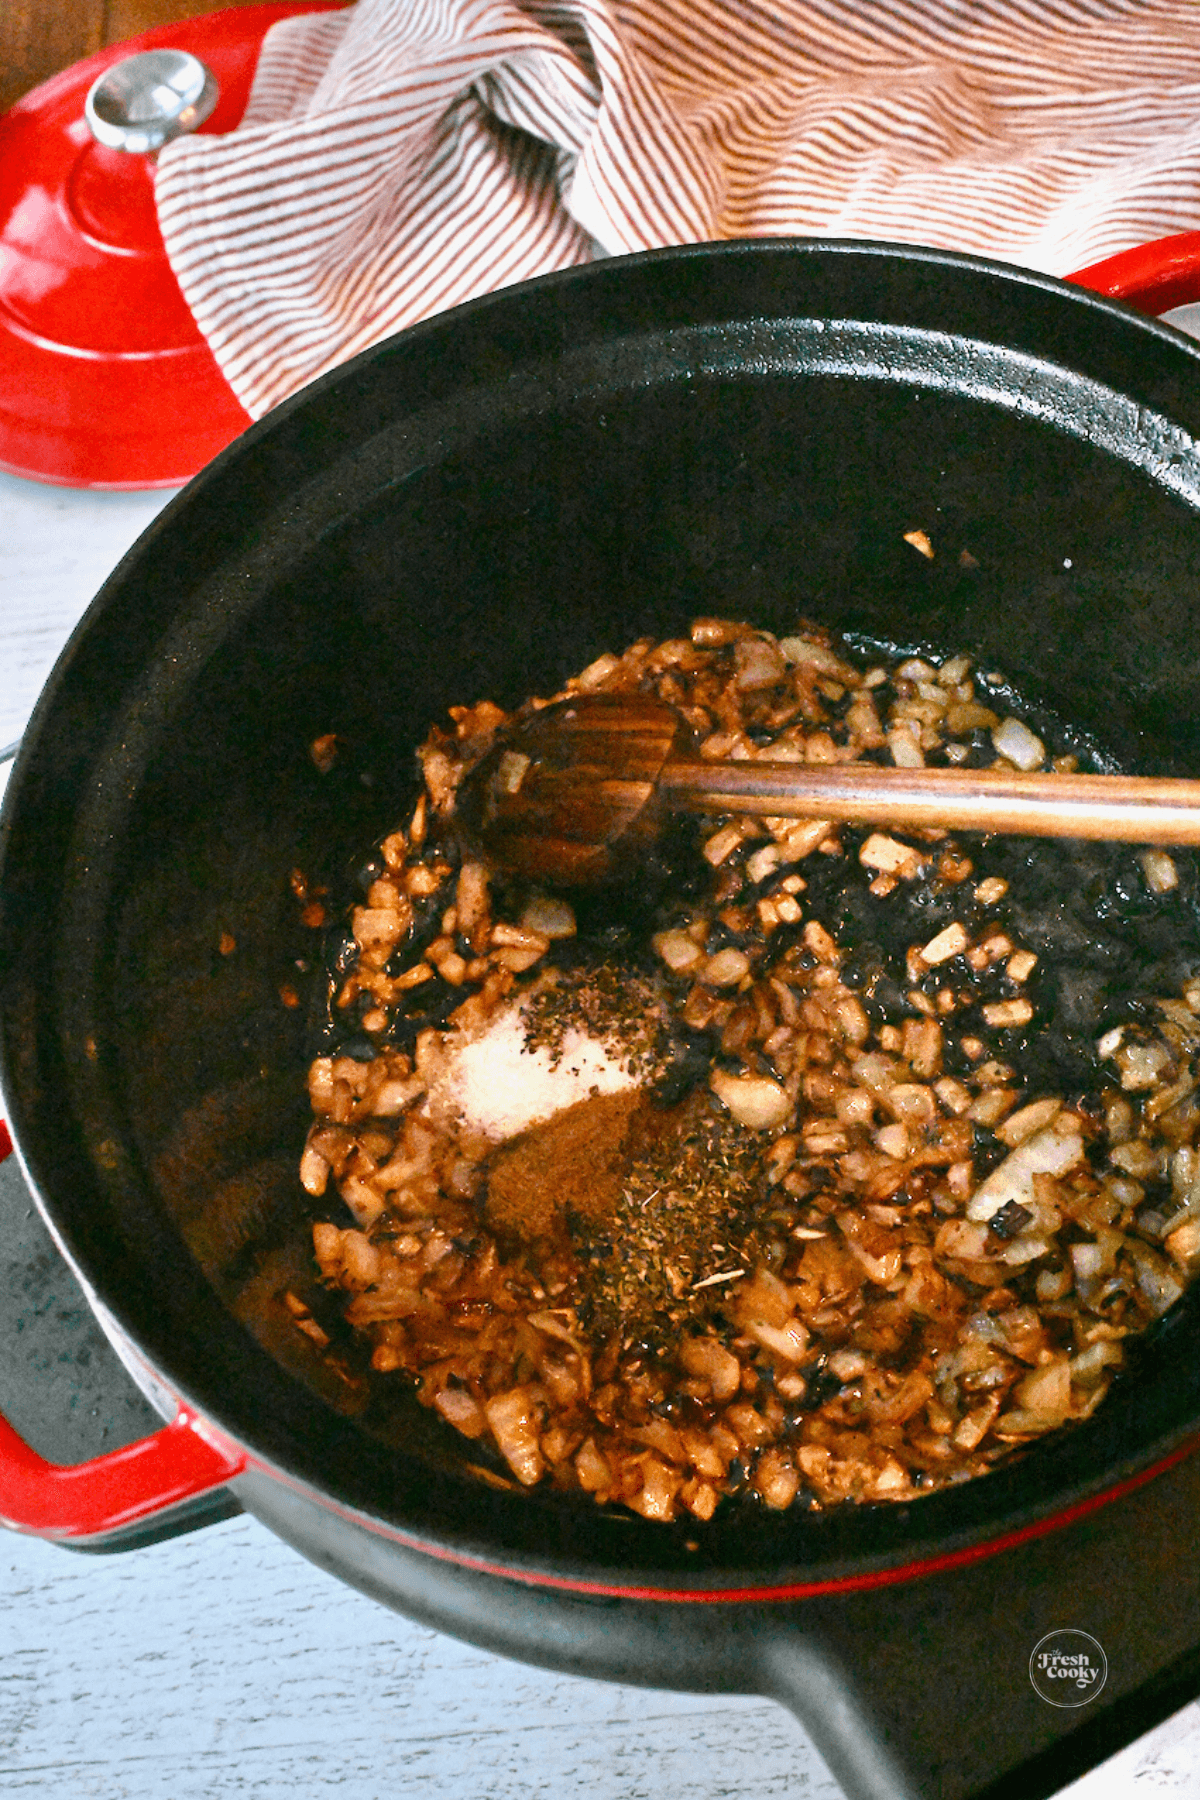 Bloom spices with onions.